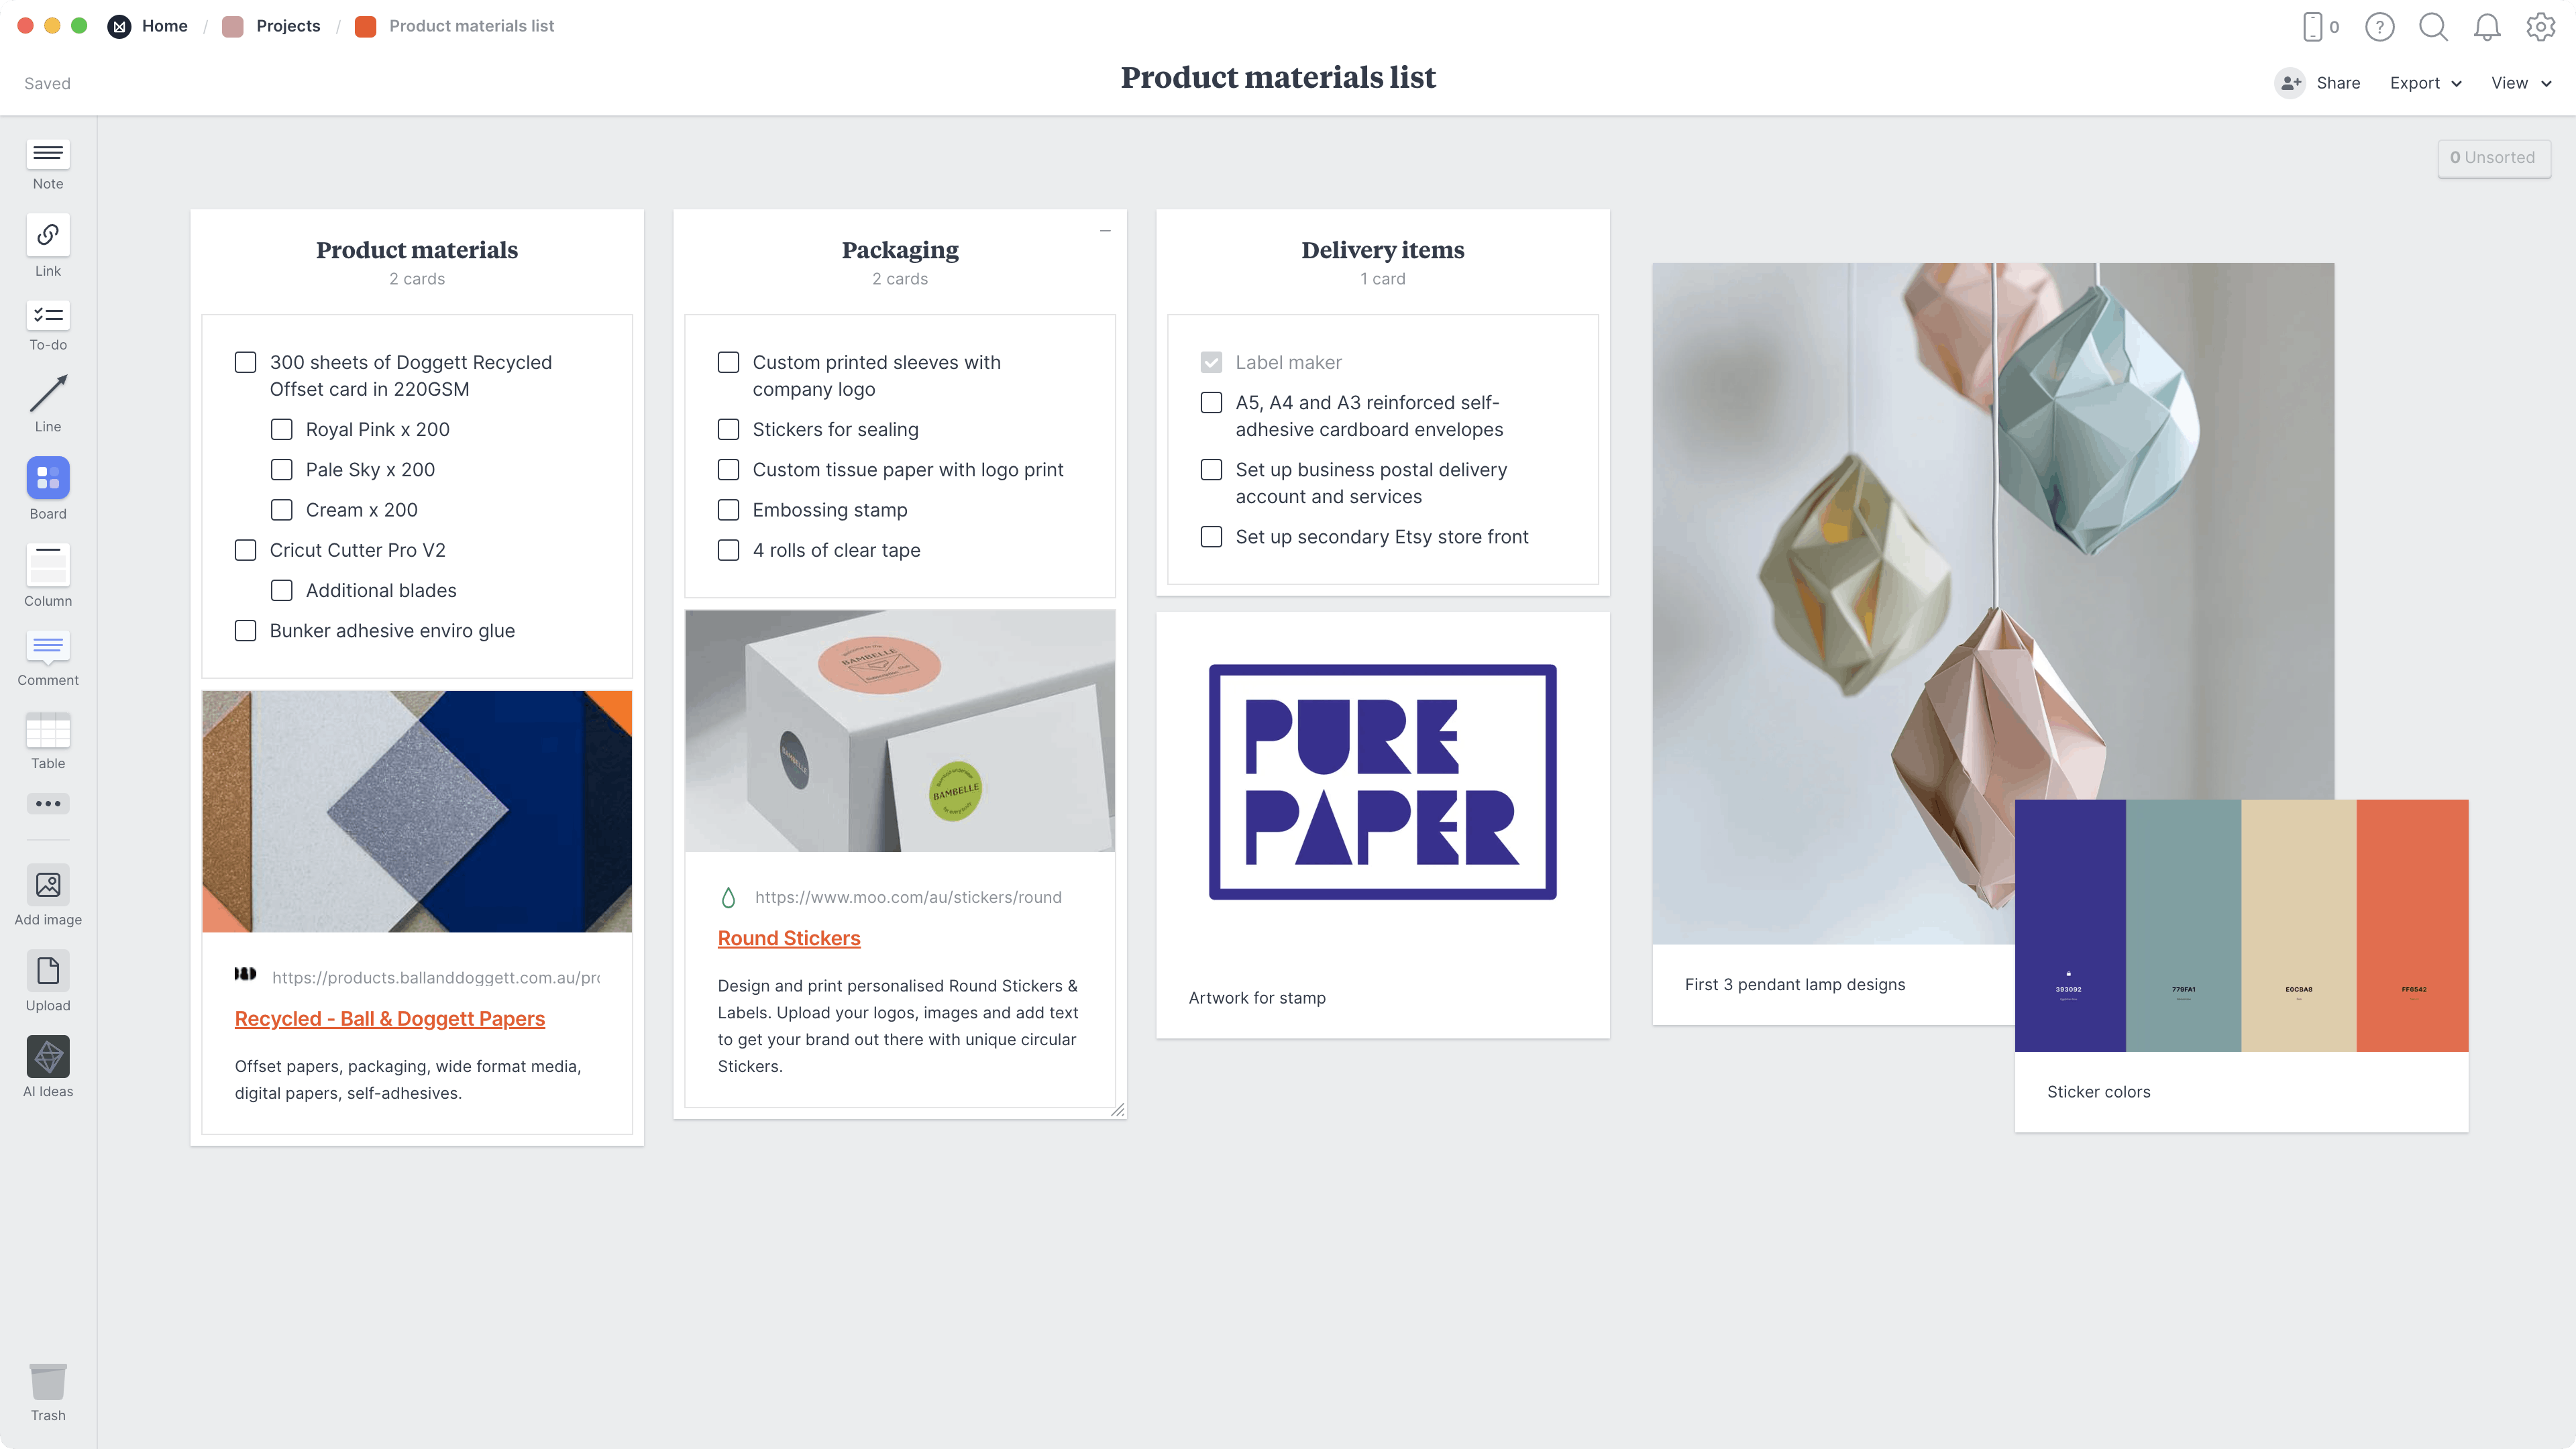 Craft Materials List Template, within the Milanote app